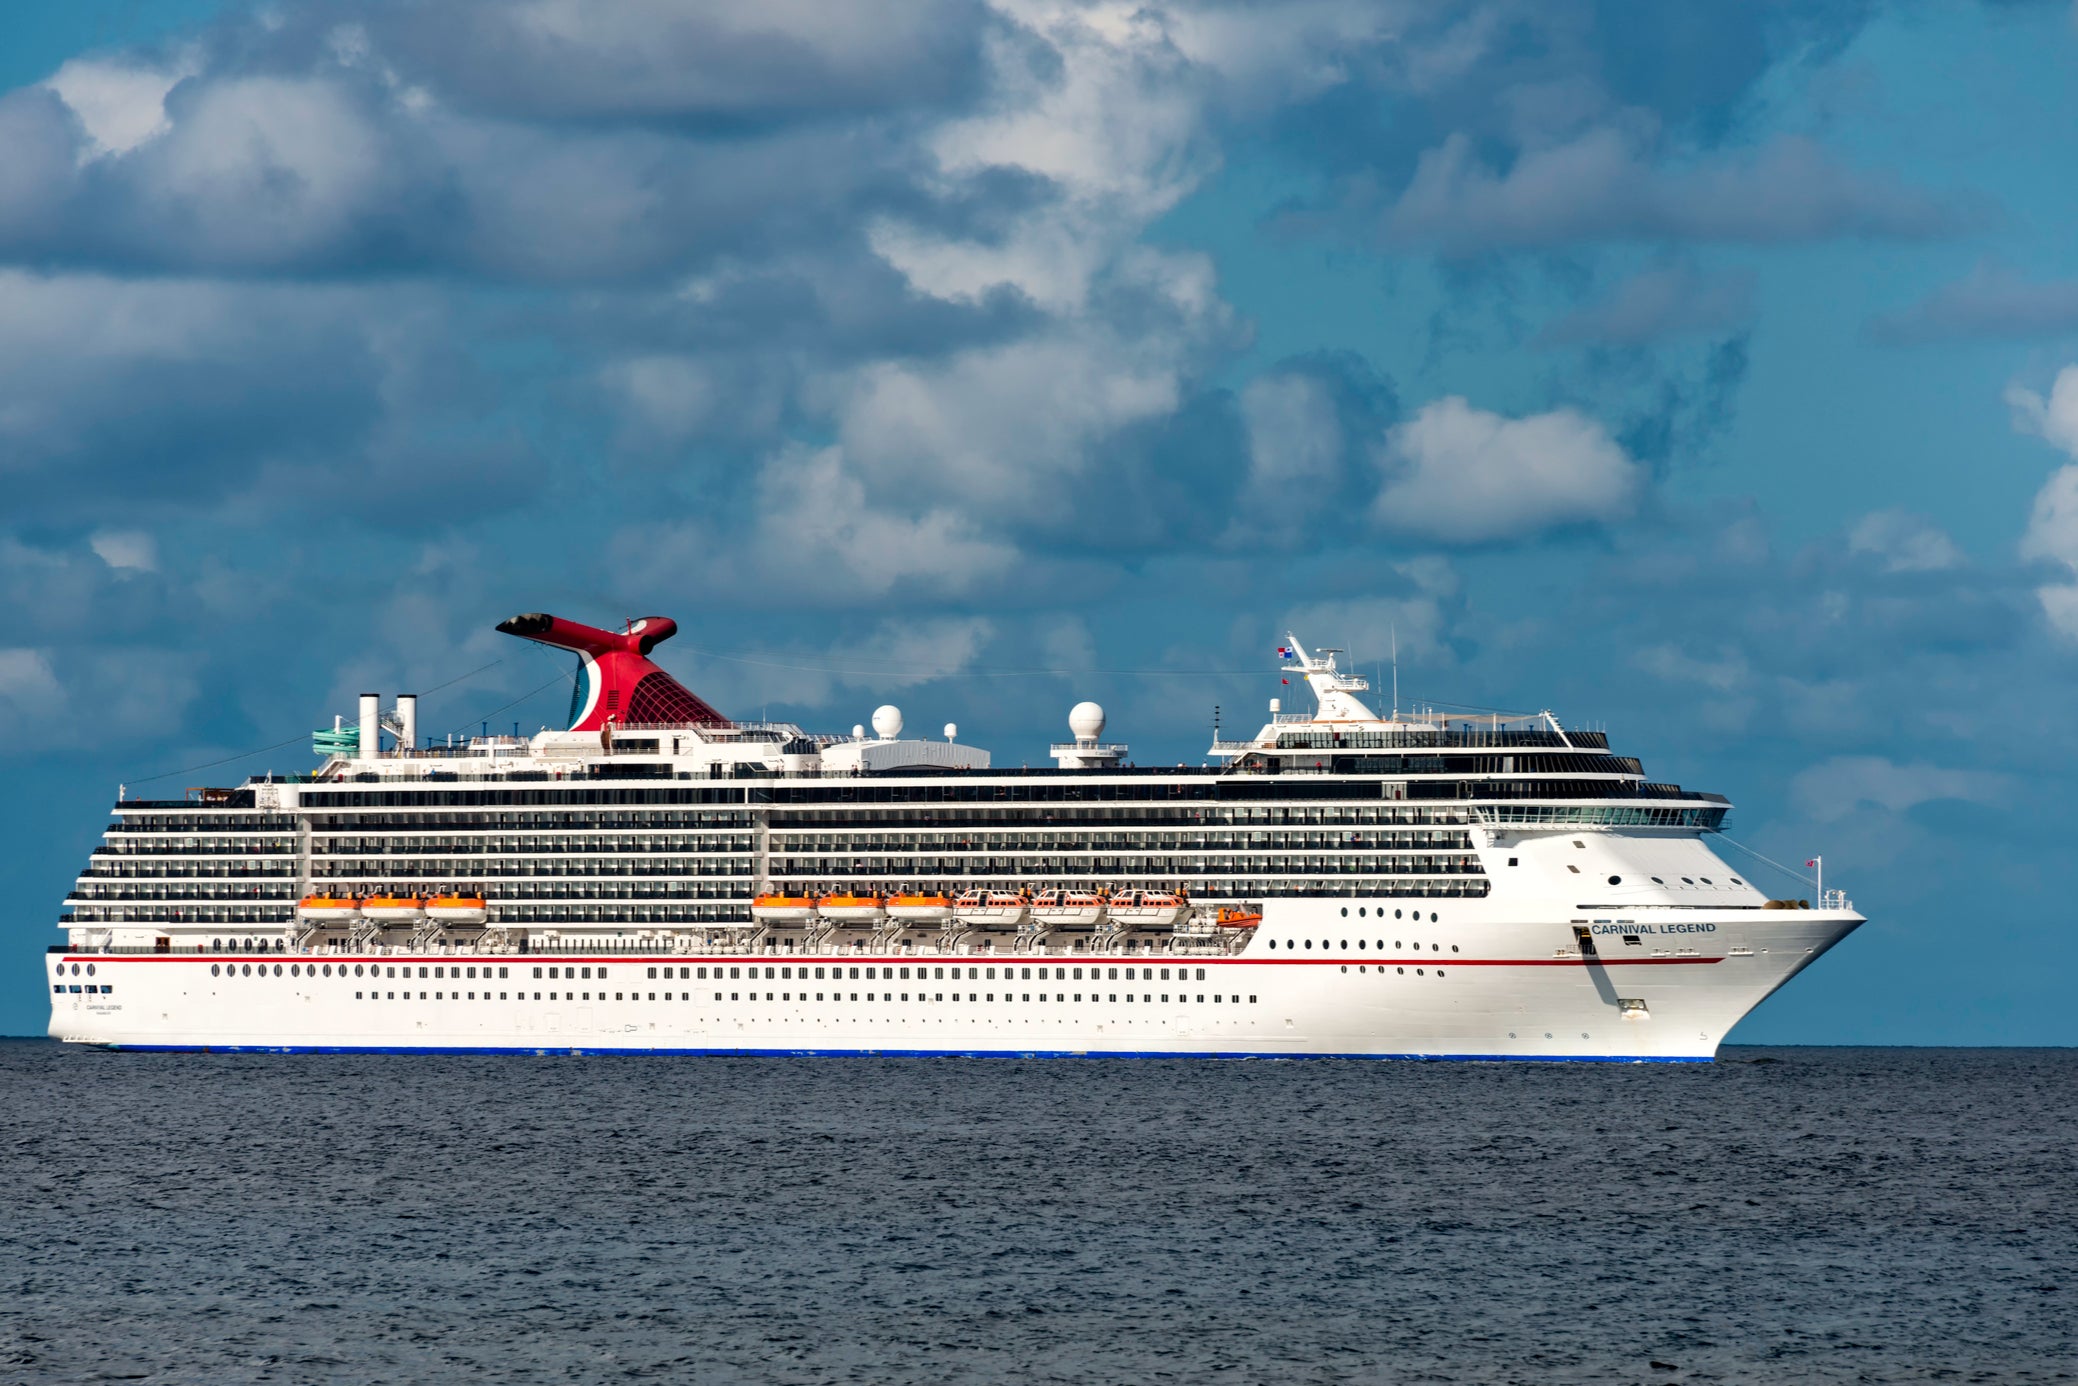 Carnival Legend has capacity for more than 2,000 passengers